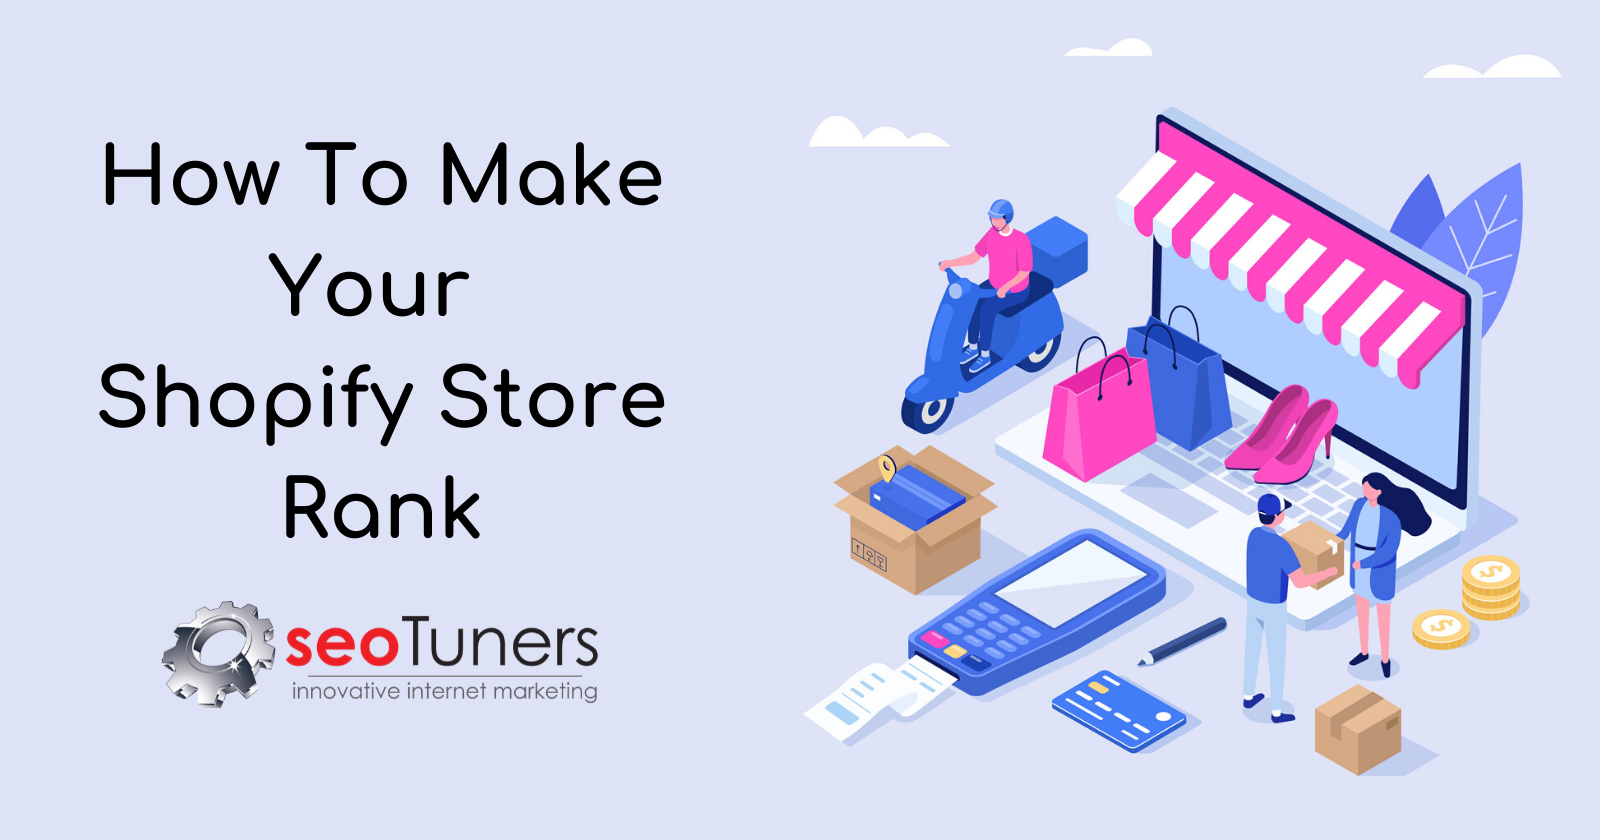 How To Make Your Shopify Store Rank